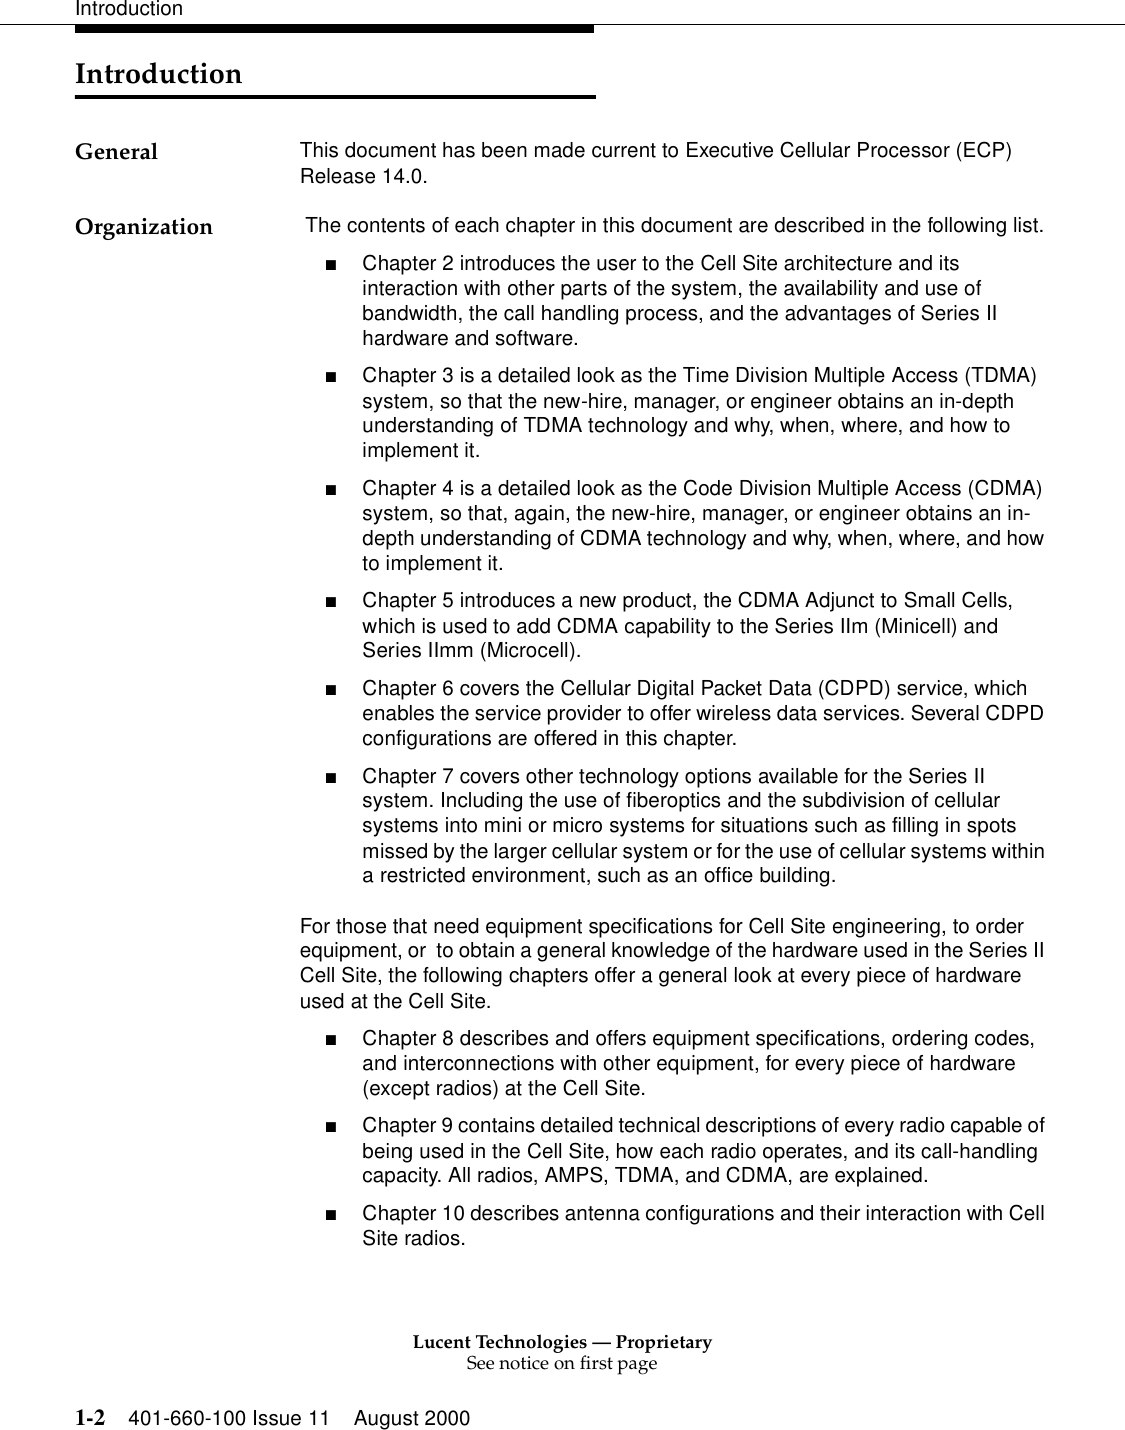 Lucent Technologies — ProprietarySee notice on first page1-2 401-660-100 Issue 11 August 2000IntroductionIntroductionGeneral This document has been made current to Executive Cellular Processor (ECP) Release 14.0. Organization  The contents of each chapter in this document are described in the following list.■Chapter 2 introduces the user to the Cell Site architecture and its interaction with other parts of the system, the availability and use of bandwidth, the call handling process, and the advantages of Series II hardware and software. ■Chapter 3 is a detailed look as the Time Division Multiple Access (TDMA) system, so that the new-hire, manager, or engineer obtains an in-depth understanding of TDMA technology and why, when, where, and how to implement it. ■Chapter 4 is a detailed look as the Code Division Multiple Access (CDMA) system, so that, again, the new-hire, manager, or engineer obtains an in-depth understanding of CDMA technology and why, when, where, and how to implement it. ■Chapter 5 introduces a new product, the CDMA Adjunct to Small Cells, which is used to add CDMA capability to the Series IIm (Minicell) and Series IImm (Microcell).■Chapter 6 covers the Cellular Digital Packet Data (CDPD) service, which enables the service provider to offer wireless data services. Several CDPD configurations are offered in this chapter. ■Chapter 7 covers other technology options available for the Series II system. Including the use of fiberoptics and the subdivision of cellular systems into mini or micro systems for situations such as filling in spots missed by the larger cellular system or for the use of cellular systems within a restricted environment, such as an office building.For those that need equipment specifications for Cell Site engineering, to order equipment, or  to obtain a general knowledge of the hardware used in the Series II Cell Site, the following chapters offer a general look at every piece of hardware used at the Cell Site. ■Chapter 8 describes and offers equipment specifications, ordering codes, and interconnections with other equipment, for every piece of hardware (except radios) at the Cell Site. ■Chapter 9 contains detailed technical descriptions of every radio capable of being used in the Cell Site, how each radio operates, and its call-handling capacity. All radios, AMPS, TDMA, and CDMA, are explained. ■Chapter 10 describes antenna configurations and their interaction with Cell Site radios. 